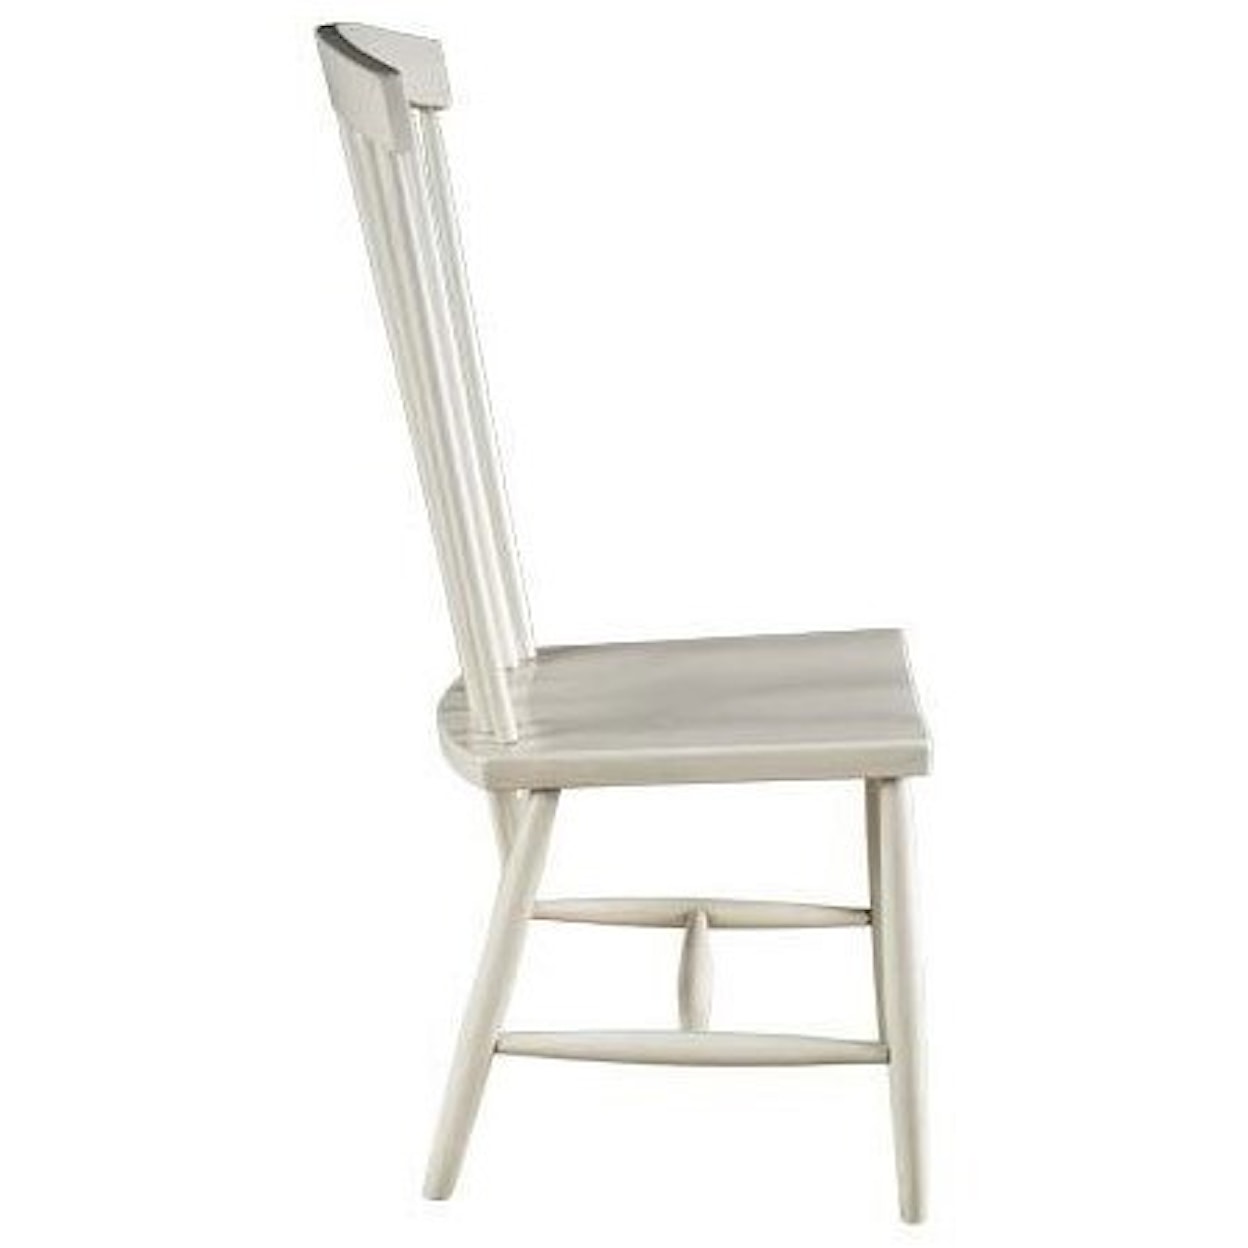 Gat Creek Courtney Dining Side Chair